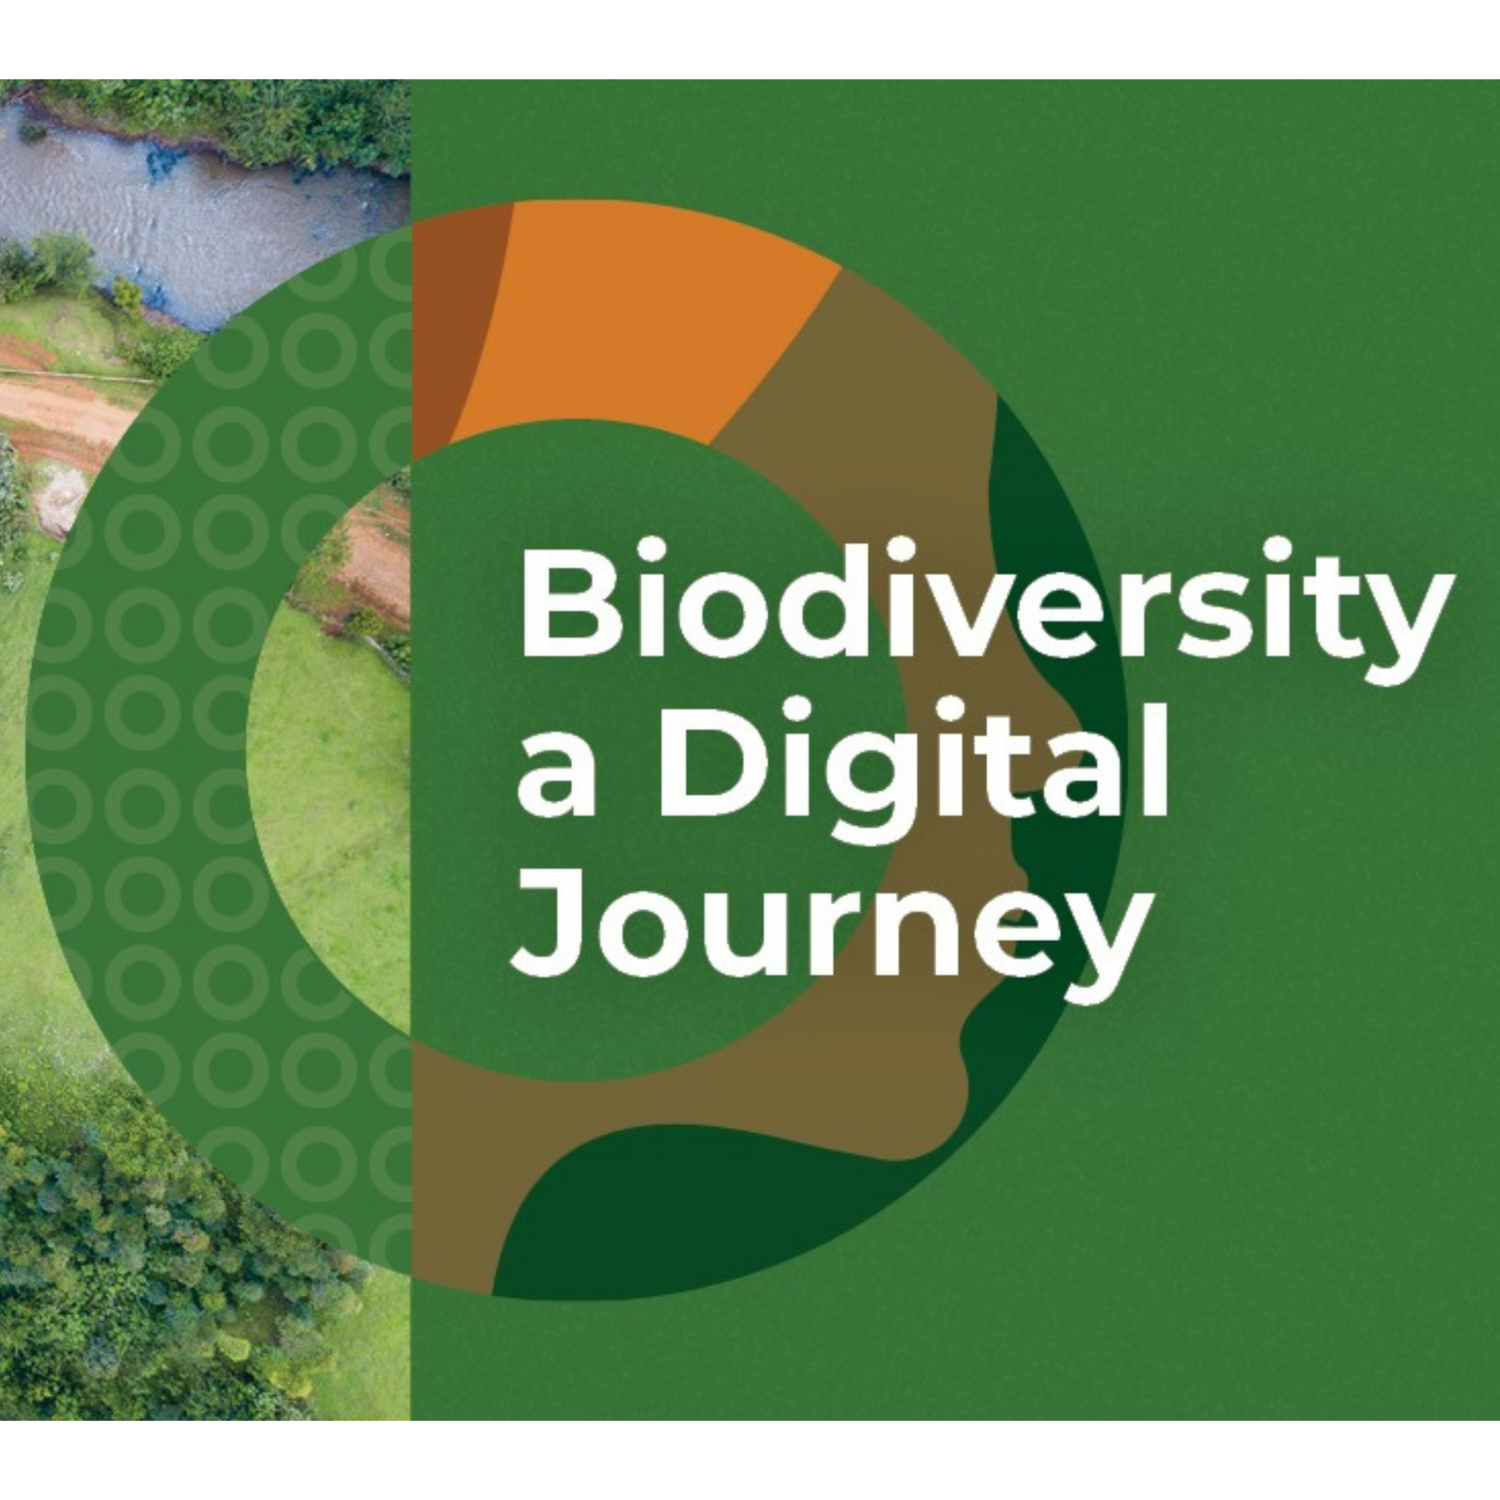 2023 WeDigBio's Why Dig Bio–Major Motivations Across Scale for Digitizing  Biodiversity on Vimeo